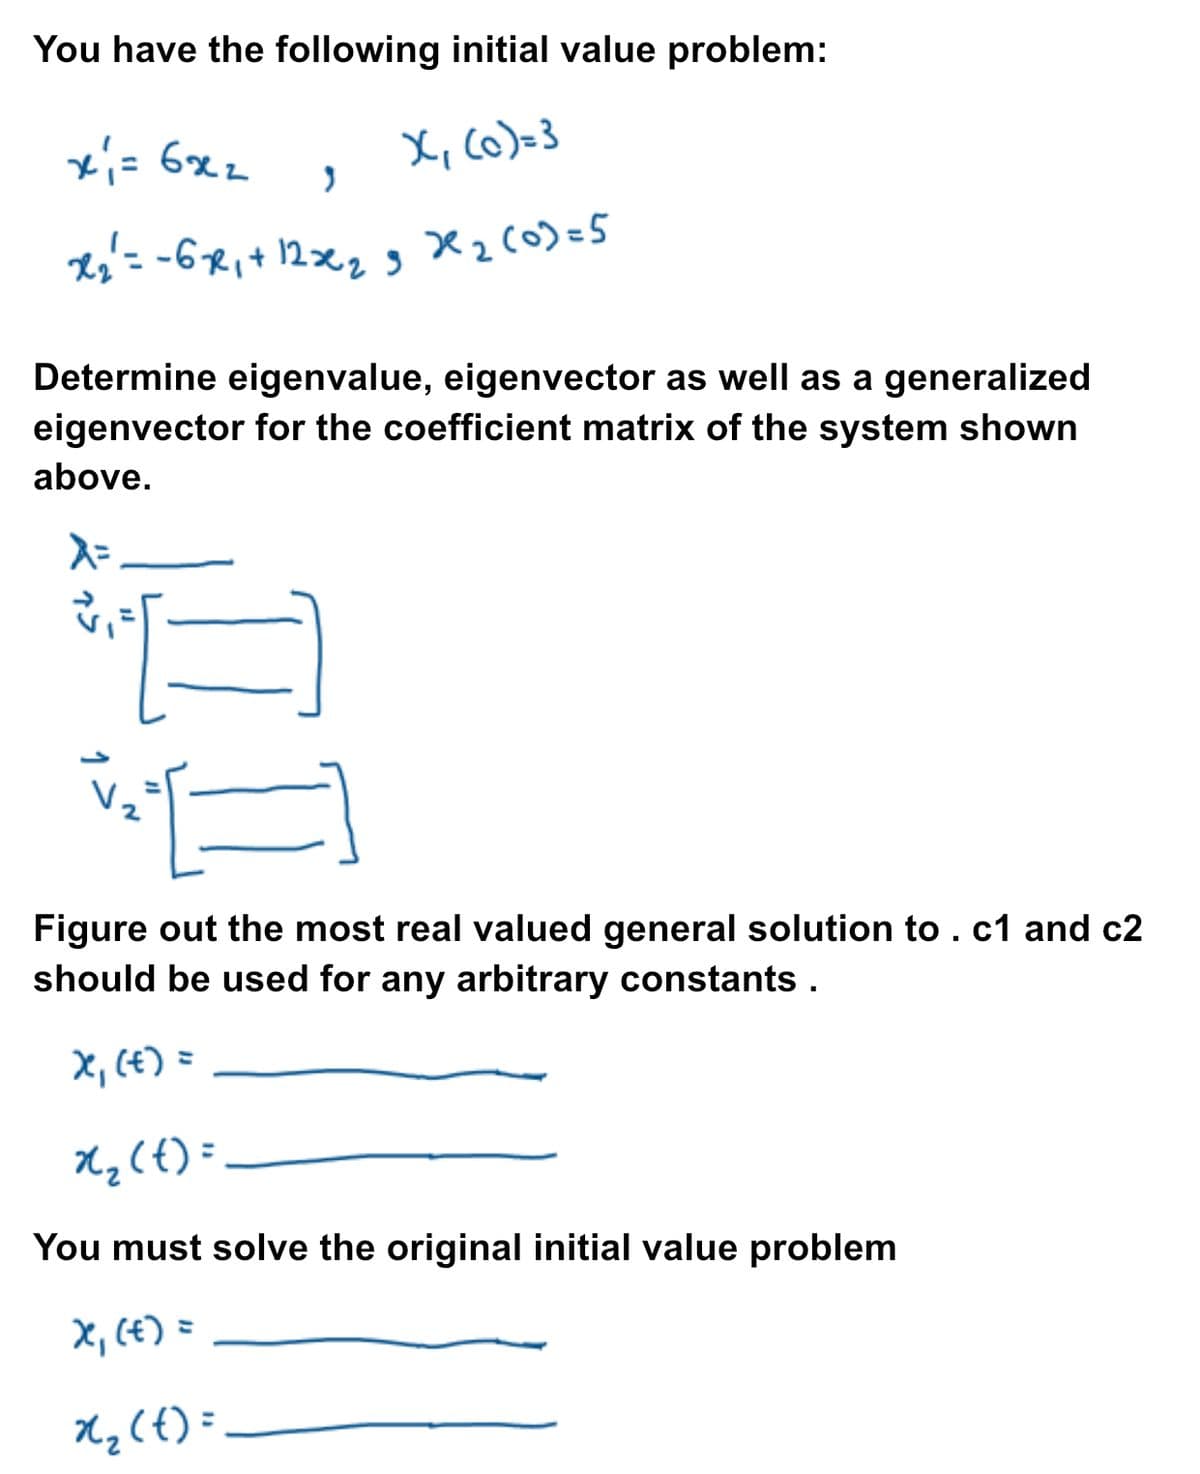 You have the following initial value problem:
xi= 6x2
X₁ (c)=3
3
x ₂² = -6-x₁ + 12x₂ 3x²₂ (0)=5
9
Determine eigenvalue, eigenvector as well as a generalized
eigenvector for the coefficient matrix of the system shown
above.
λ =
v₁ =
Figure out the most real valued general solution to . c1 and c2
should be used for any arbitrary constants.
x₁ (t) =
x₂ (t) =
You must solve the original initial value problem
X₁ (t) =
x₂ (t)=